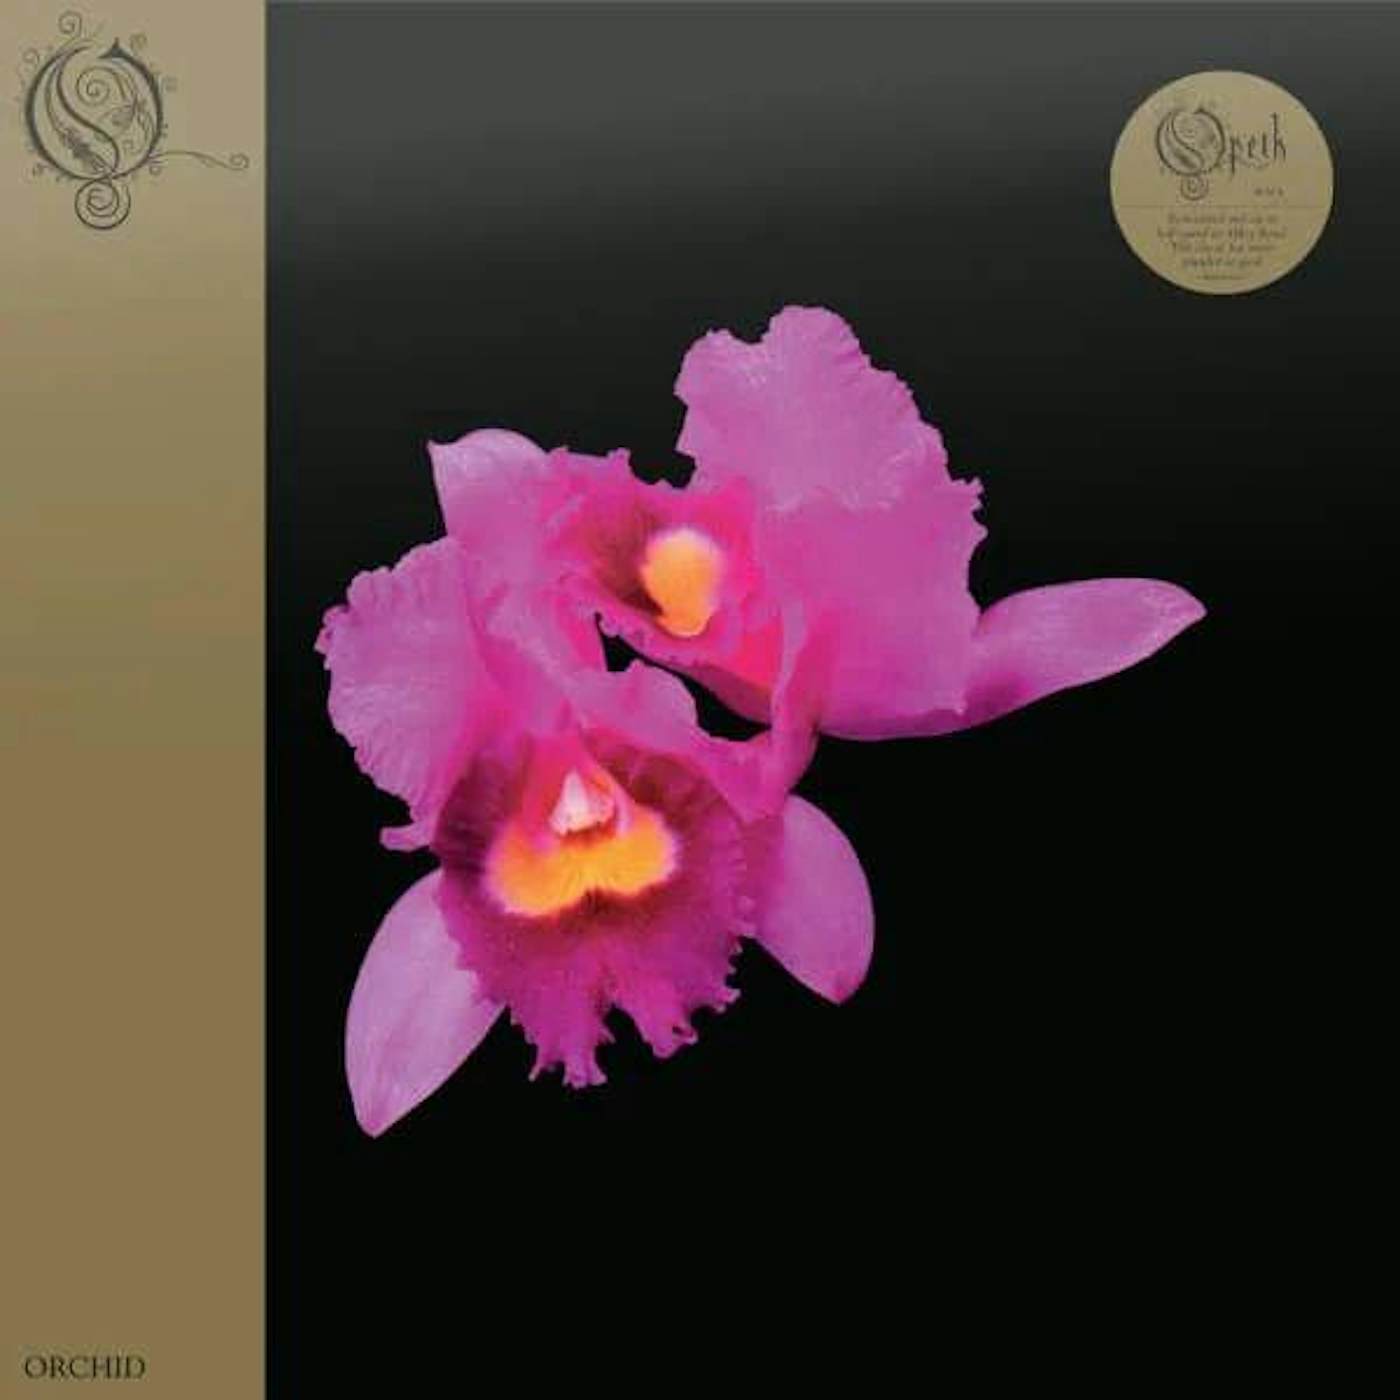 Opeth ORCHID - RED Vinyl Record